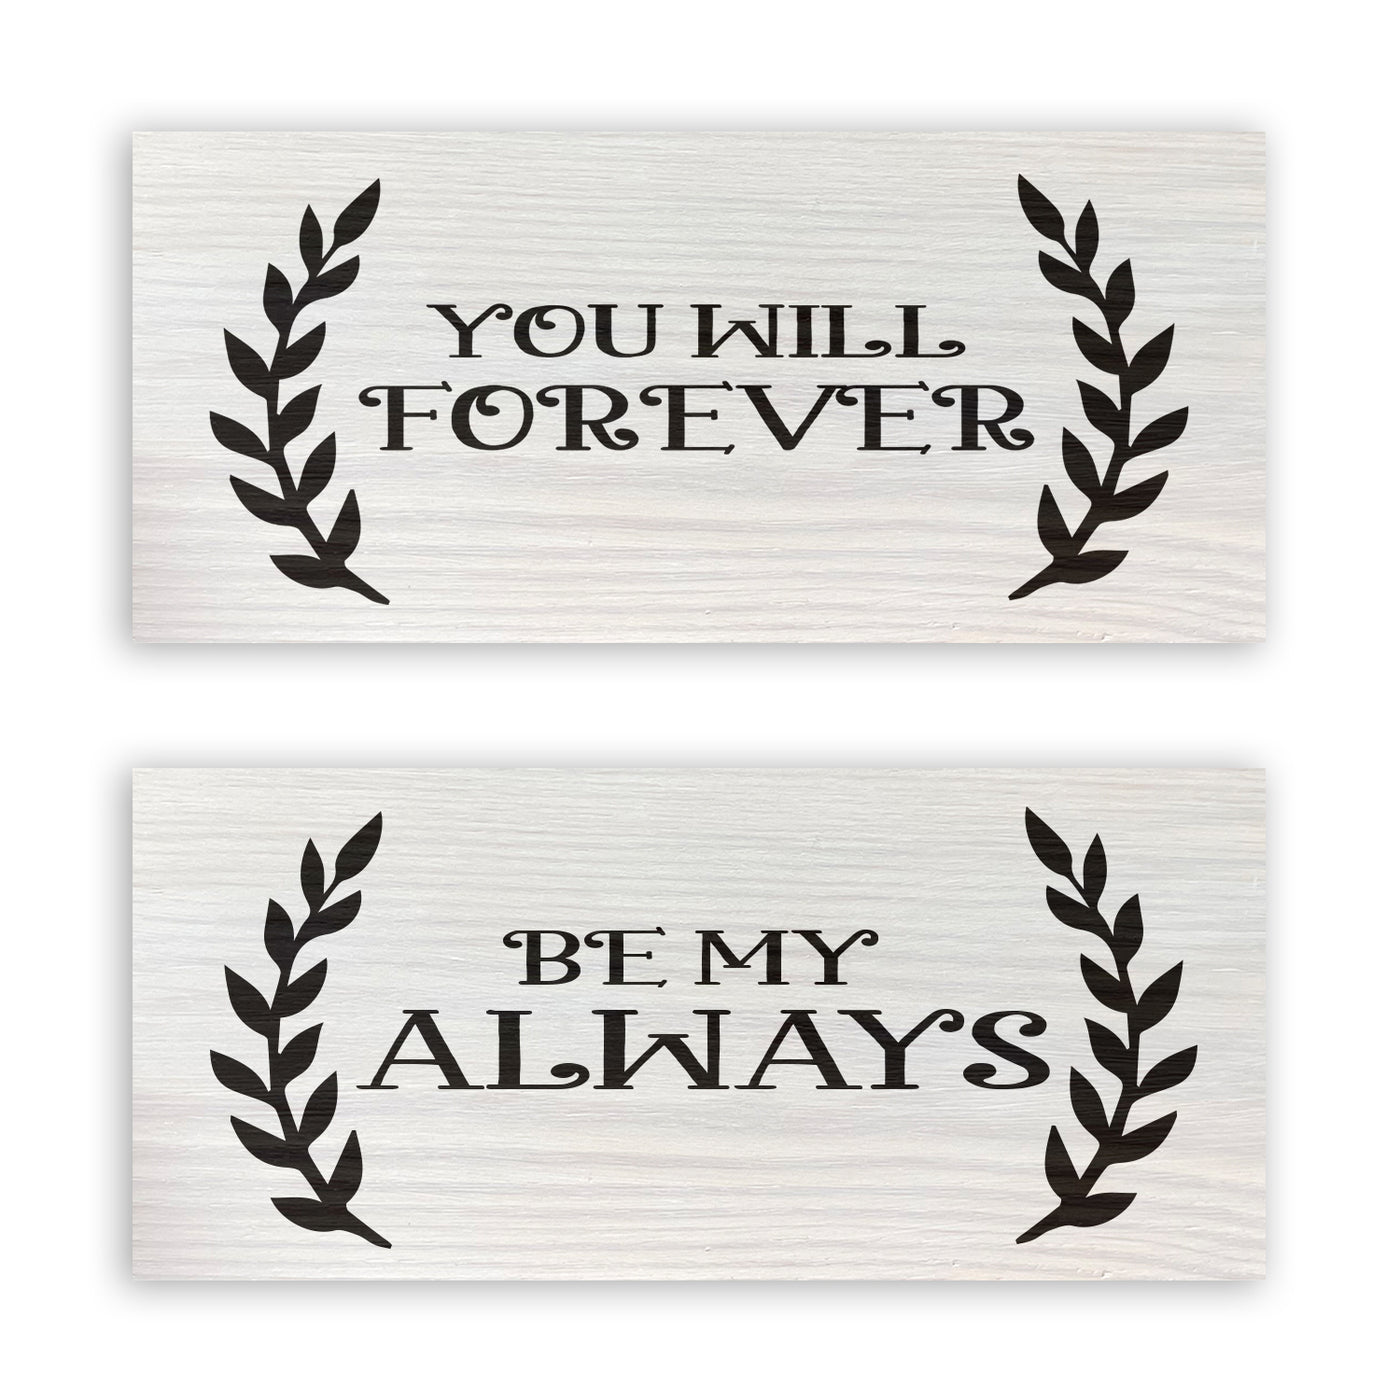 You Will Forever Be My Always with leaf branch graphic